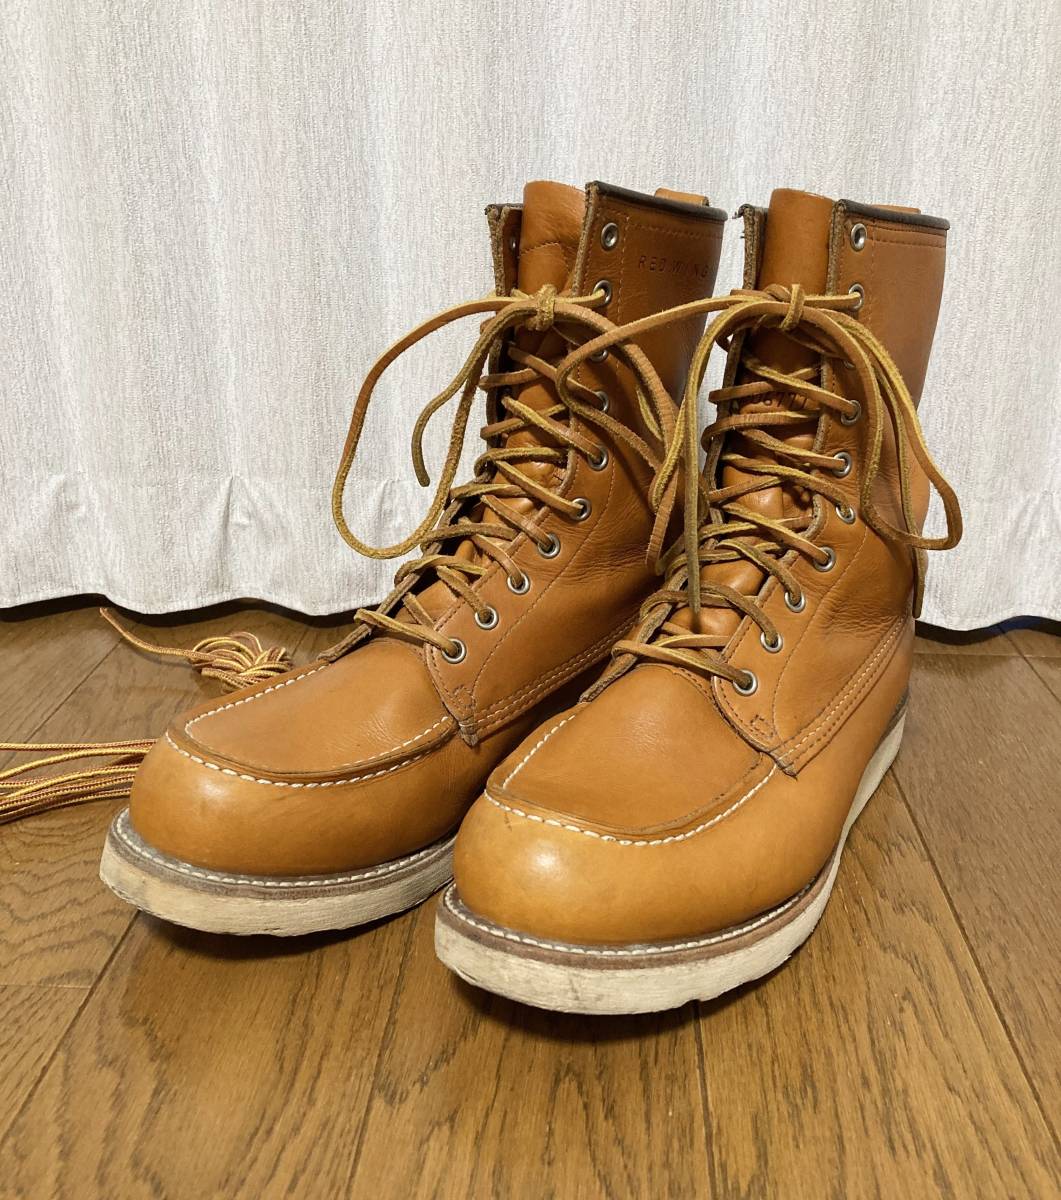 [REDWING] 9877 dog tag reissue Gold la set long Irish setter leather boots 9.5D USA made Red Wing 